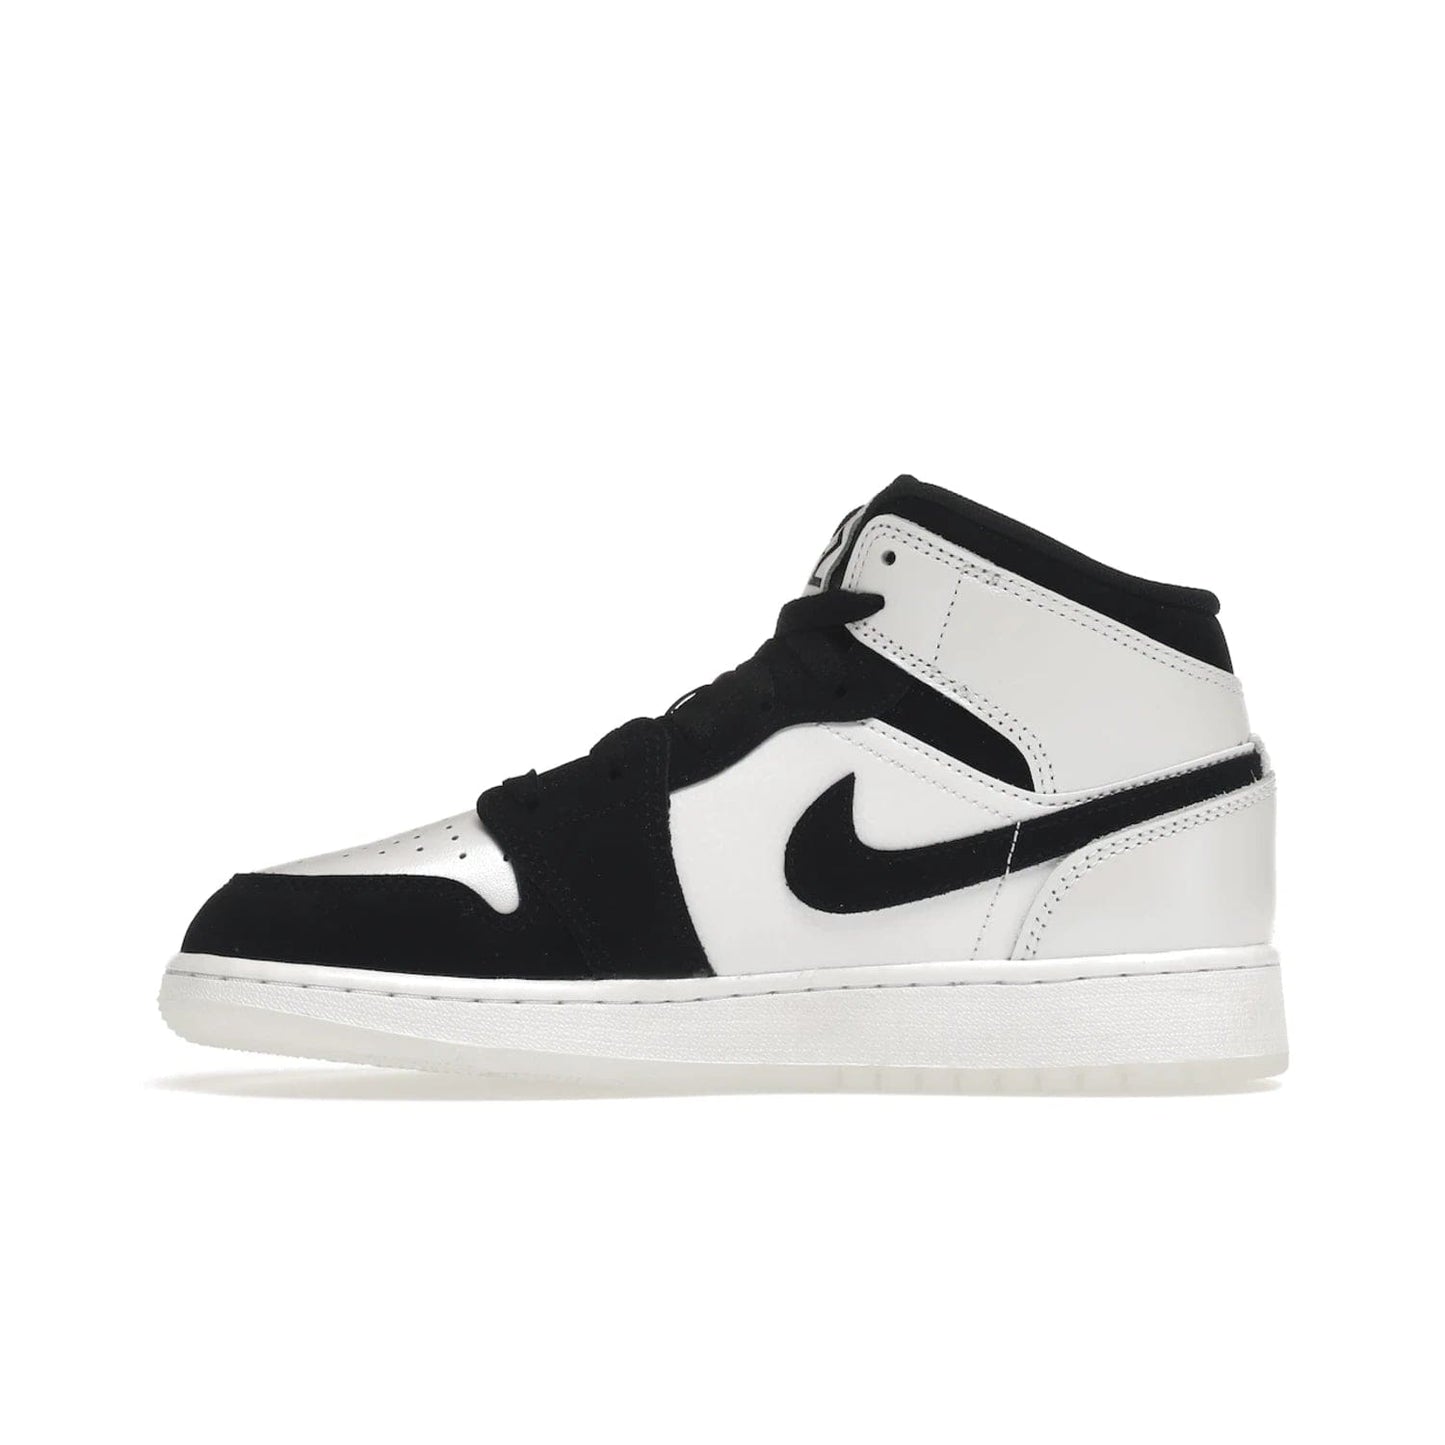 Jordan 1 Mid Diamond Shorts (GS) - Image 19 - Only at www.BallersClubKickz.com - Get the Jordan 1 Mid Diamond Shorts GS on 9th Feb 2022! Features a white, black & suede design with nylon tongue, stamped wings logo, rubber midsole & outsole. Only $100!